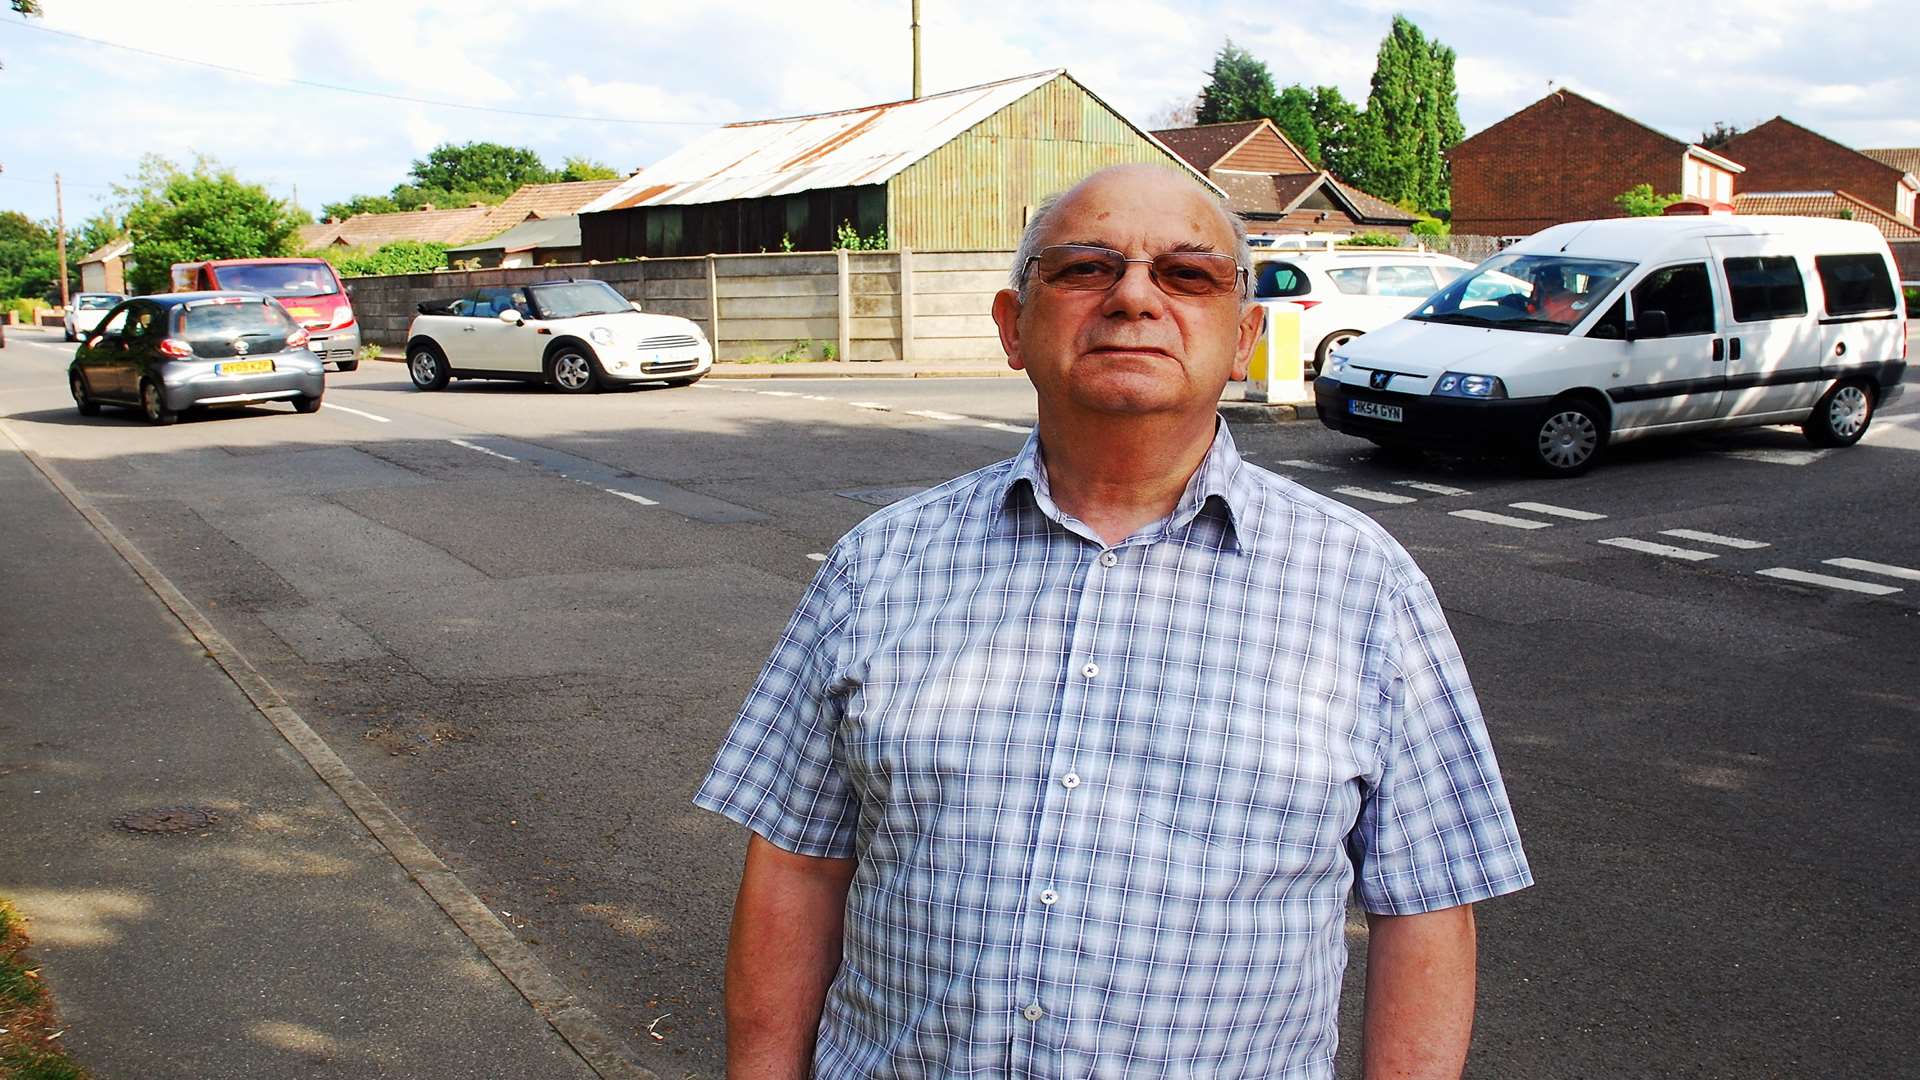 Alan Holden says the village will be cut in two